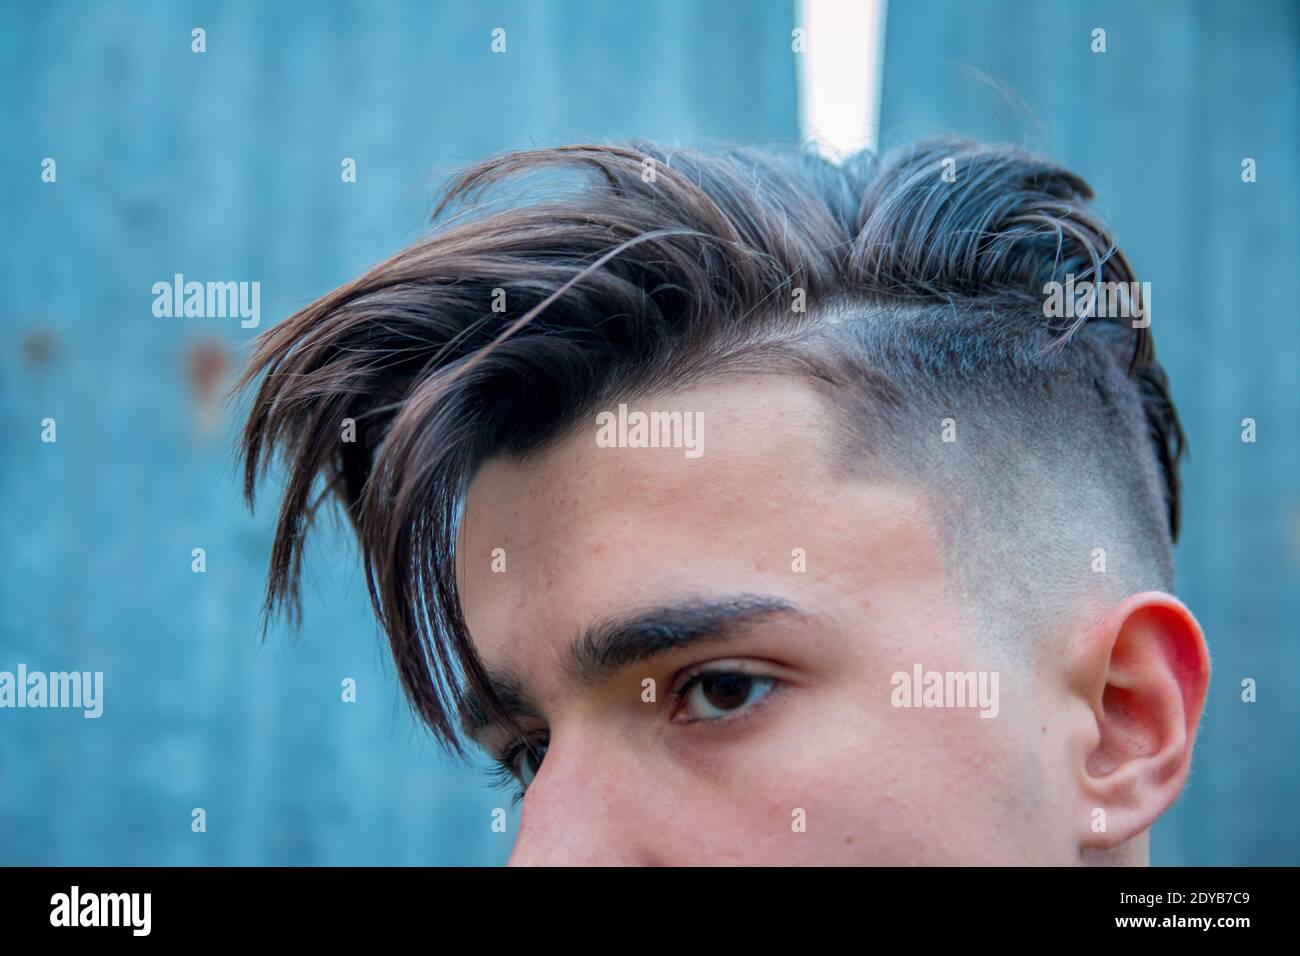 Front View Of Male Hair Cut Stock Photo - Alamy